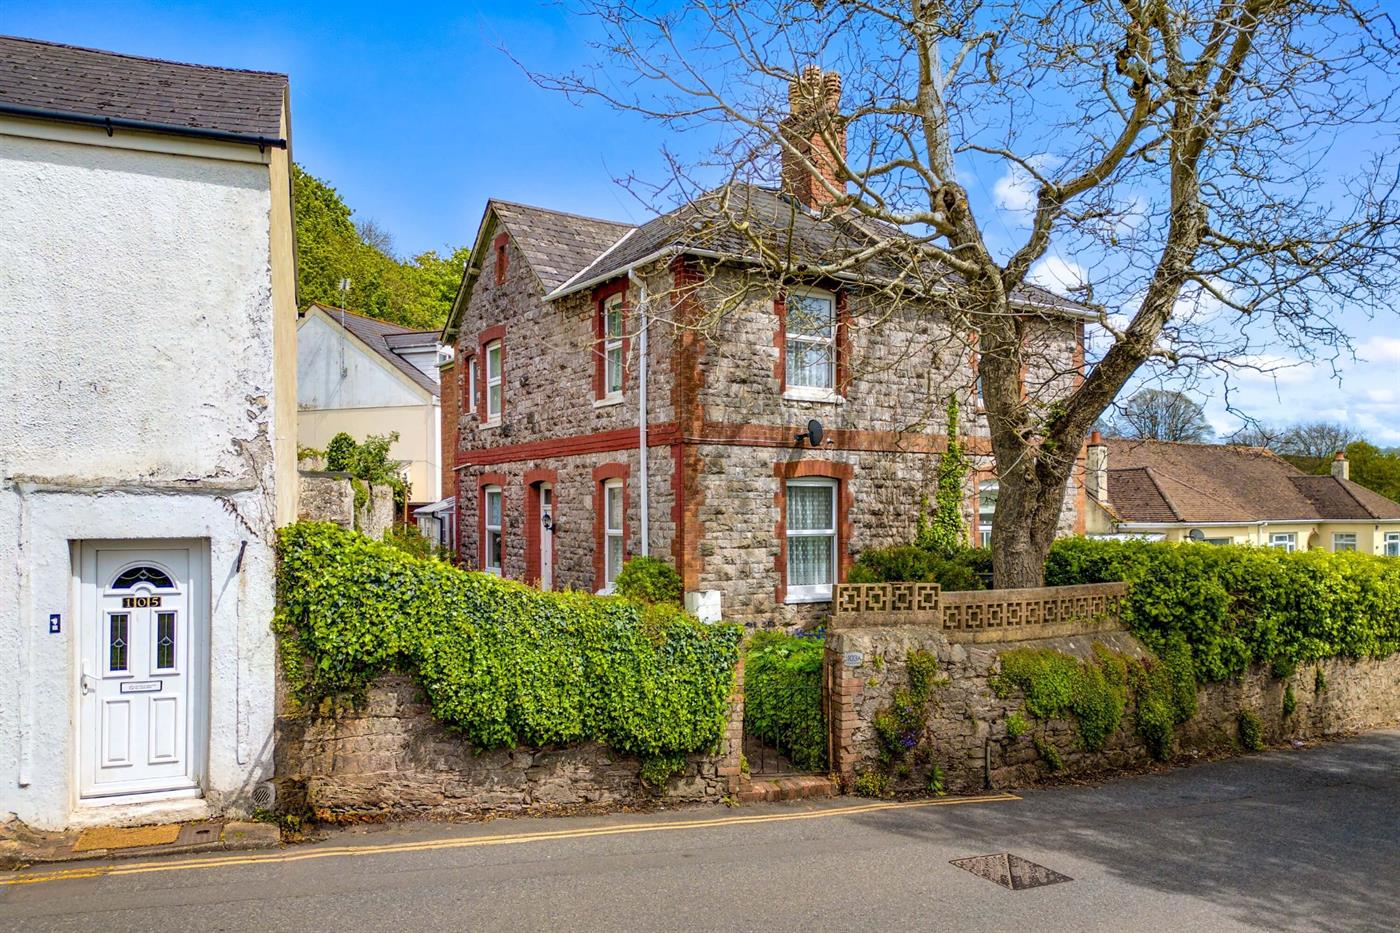 3 Bedroom Semi-Detached House for Sale: Fore Street, Torquay, TQ2 8BN